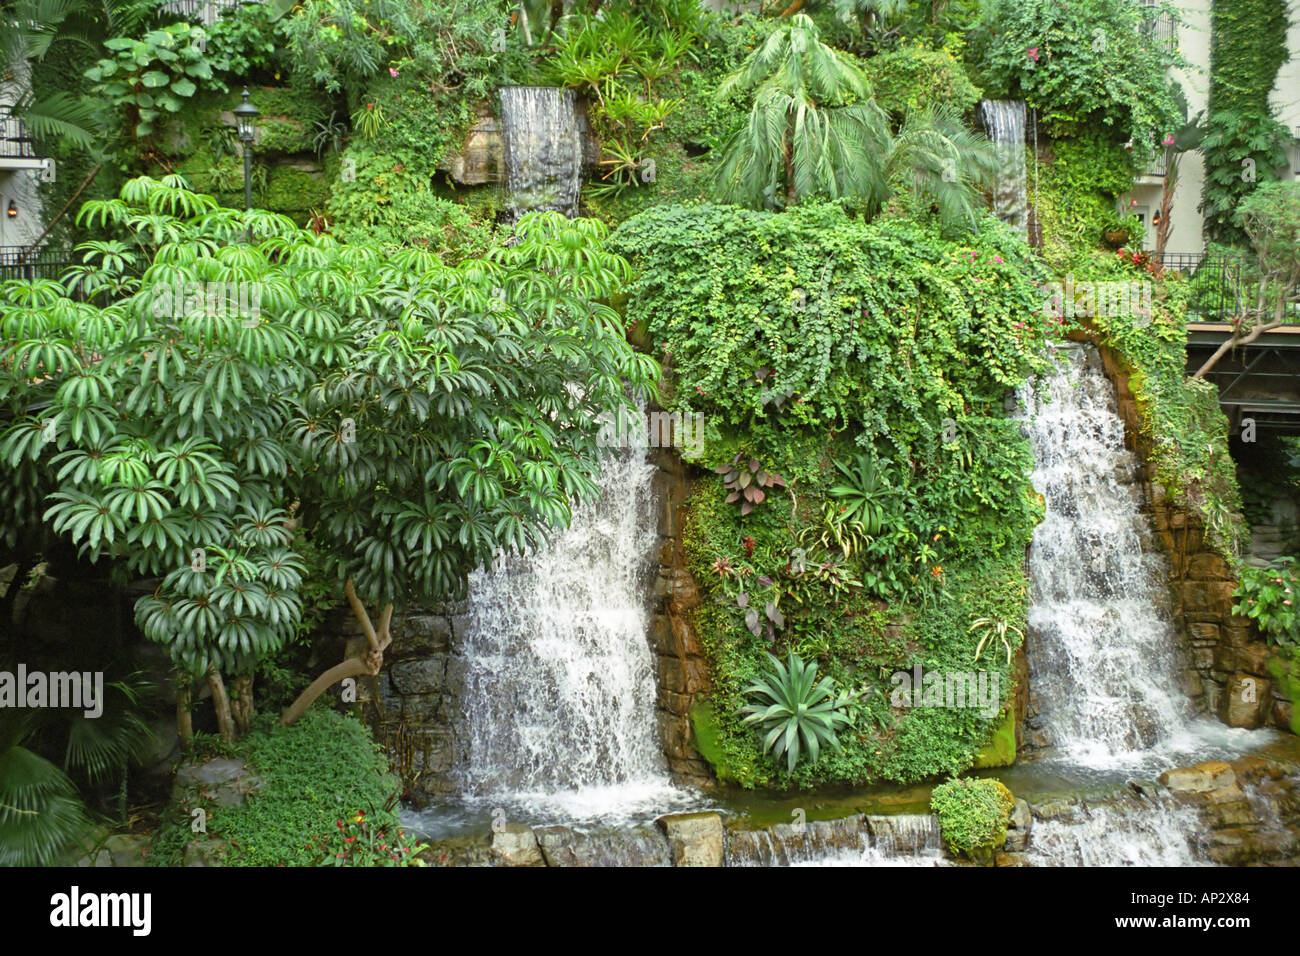 Cascate all'interno di Gaylord Opryland Hotel a Nashville Tennessee USA Foto Stock